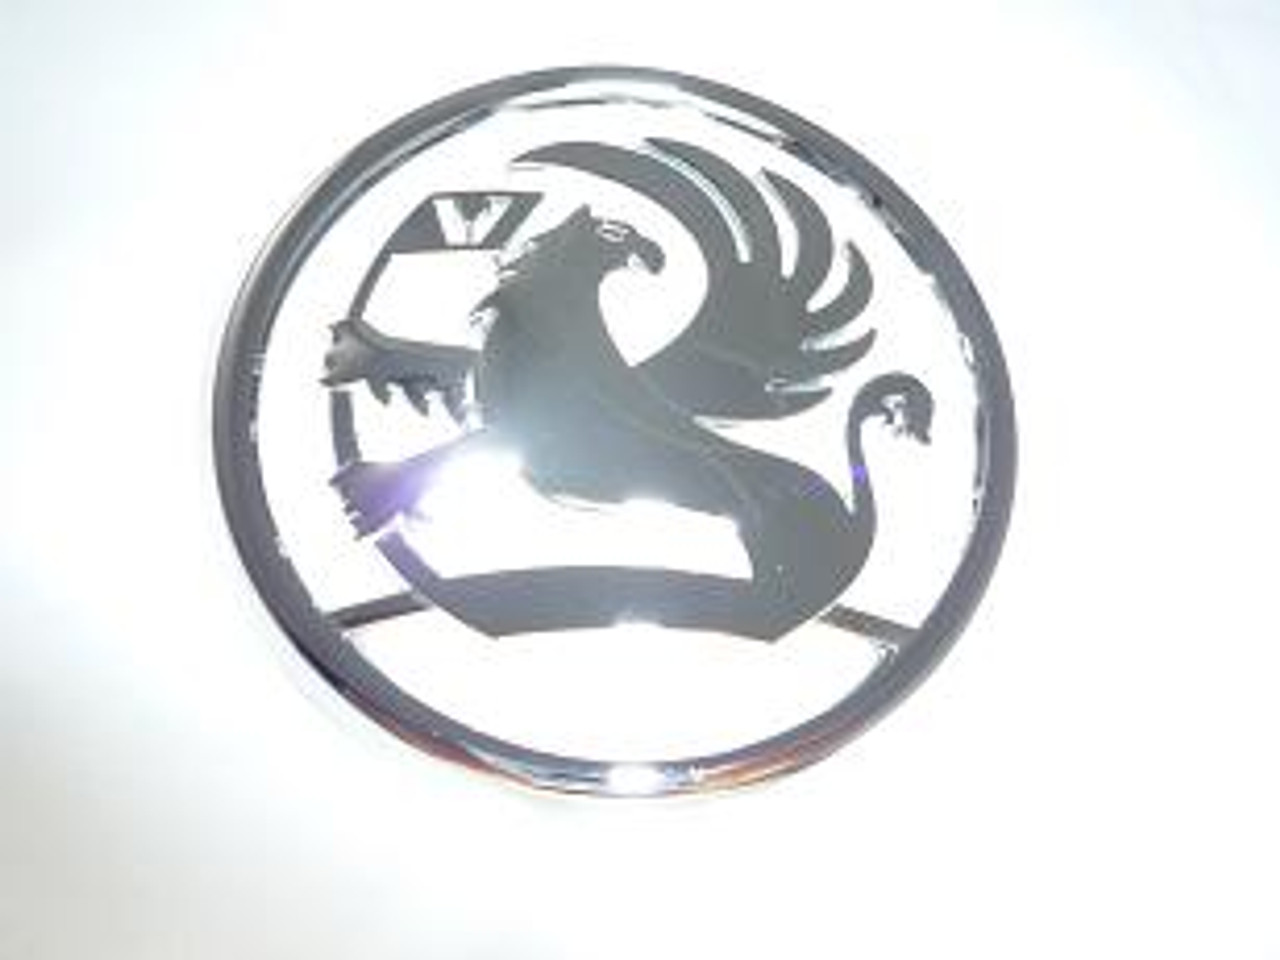 Behind the Badge: The History & Future of Vauxhall's Griffin Emblem - The  News Wheel